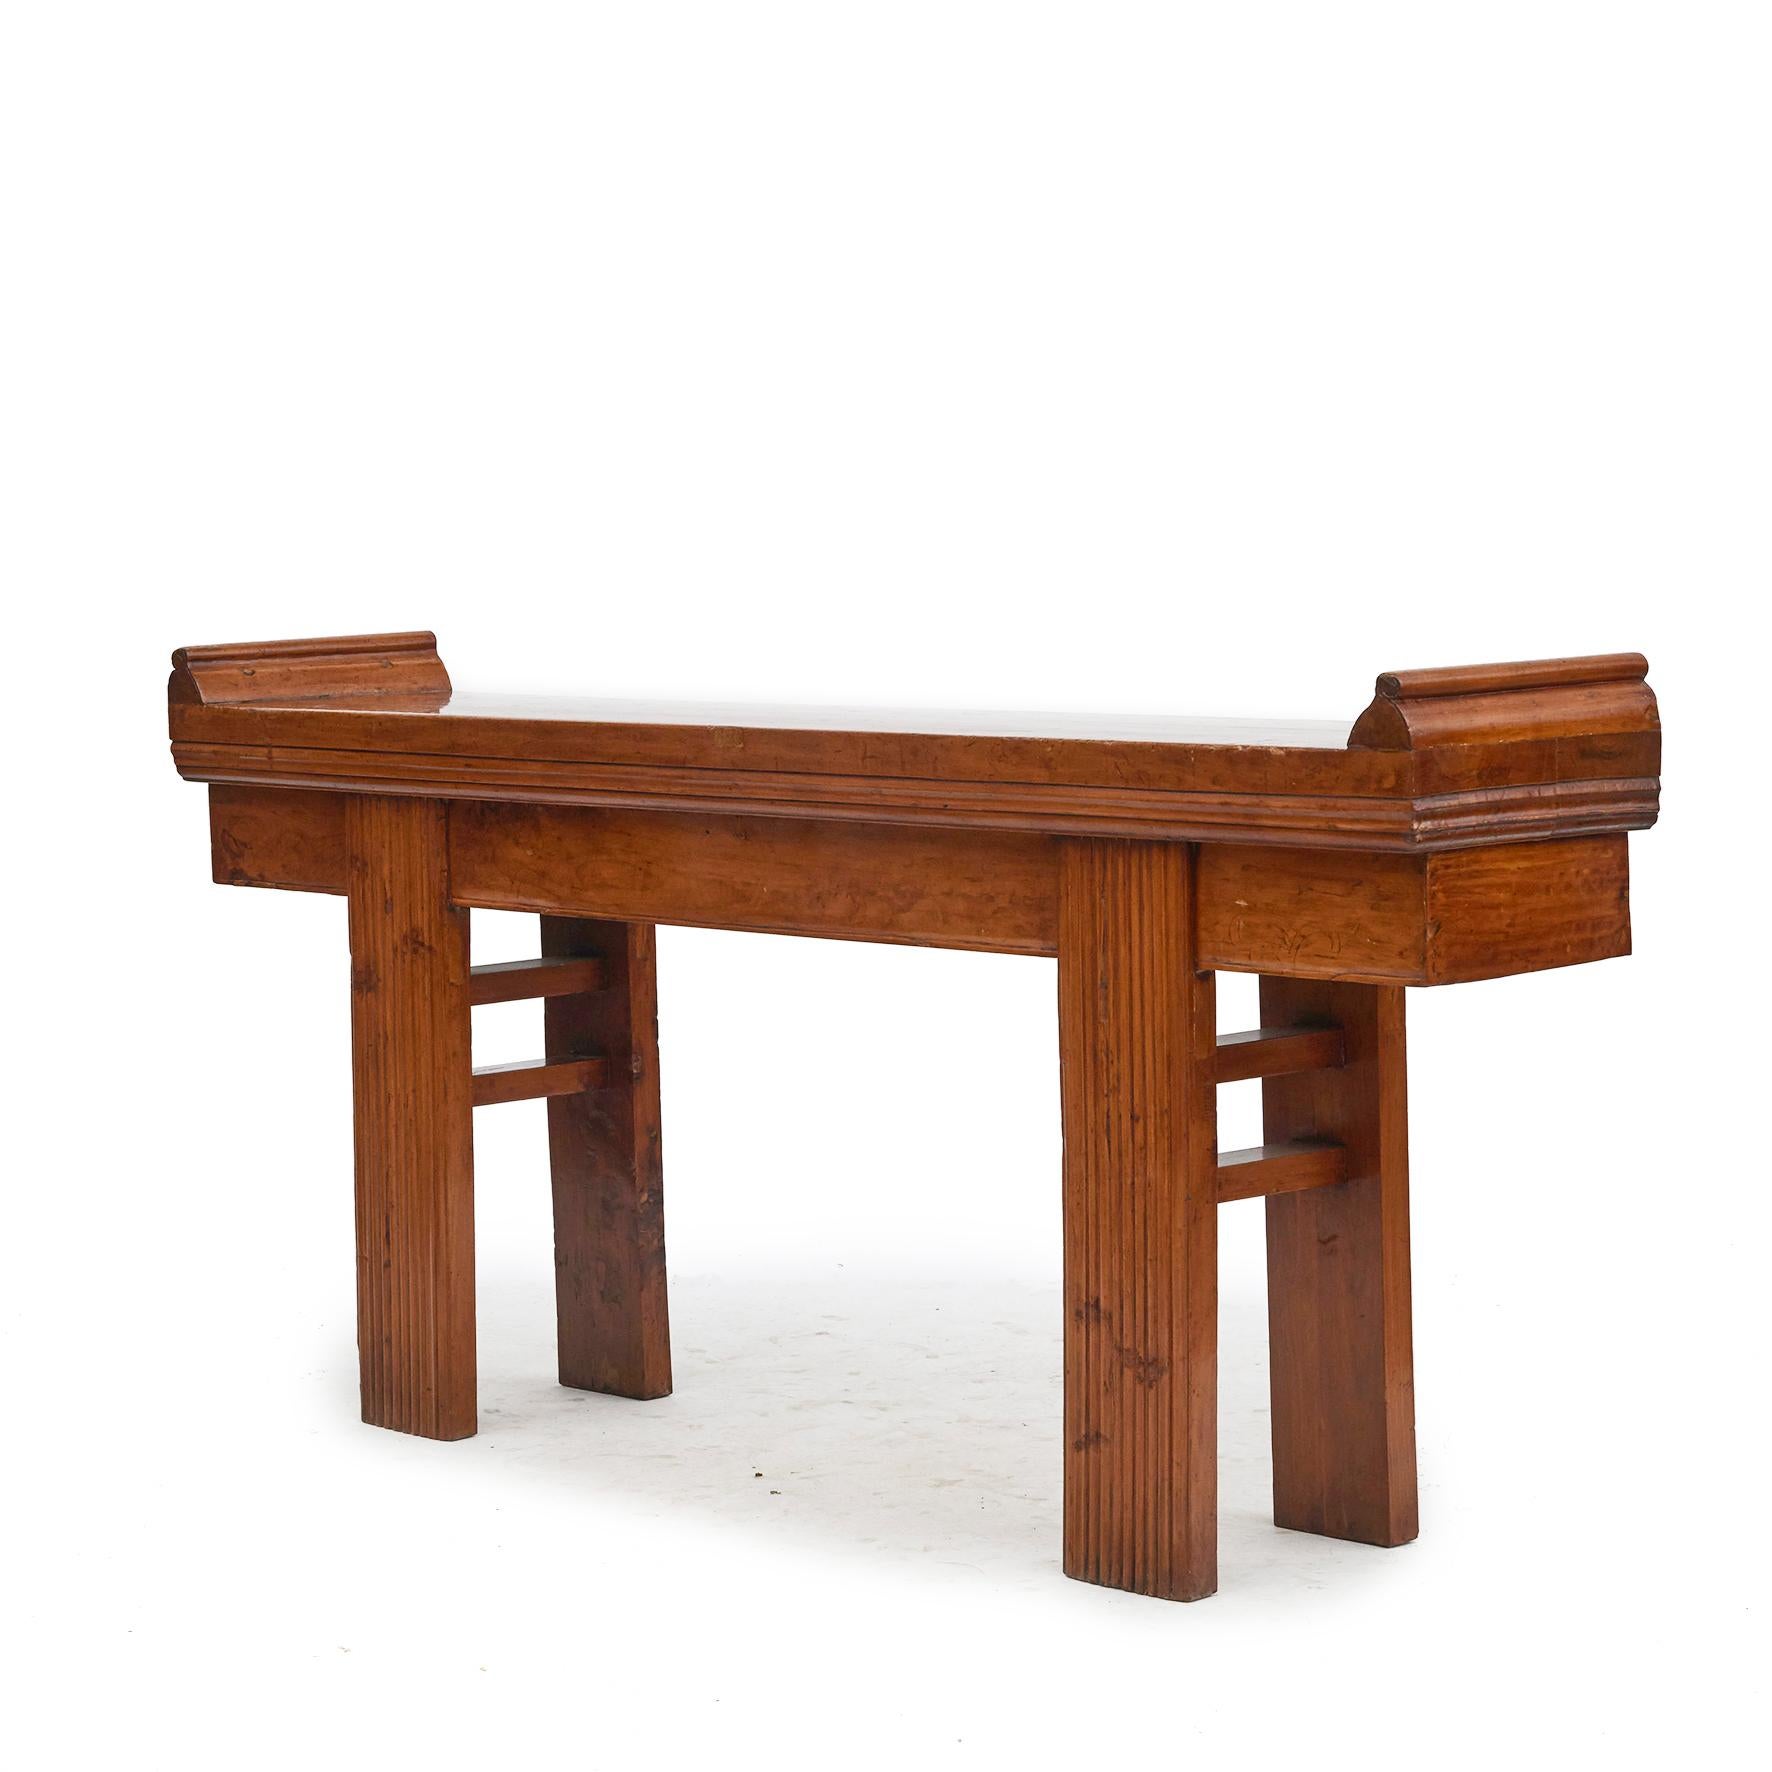 Architectural altar table / side table.
Made in the relatively rare and very beautiful peach wood.
Below the top, profiled moldings and rectangular legs with grooves.

The table appears with a beautiful glow and natural patina.

Jiangsu